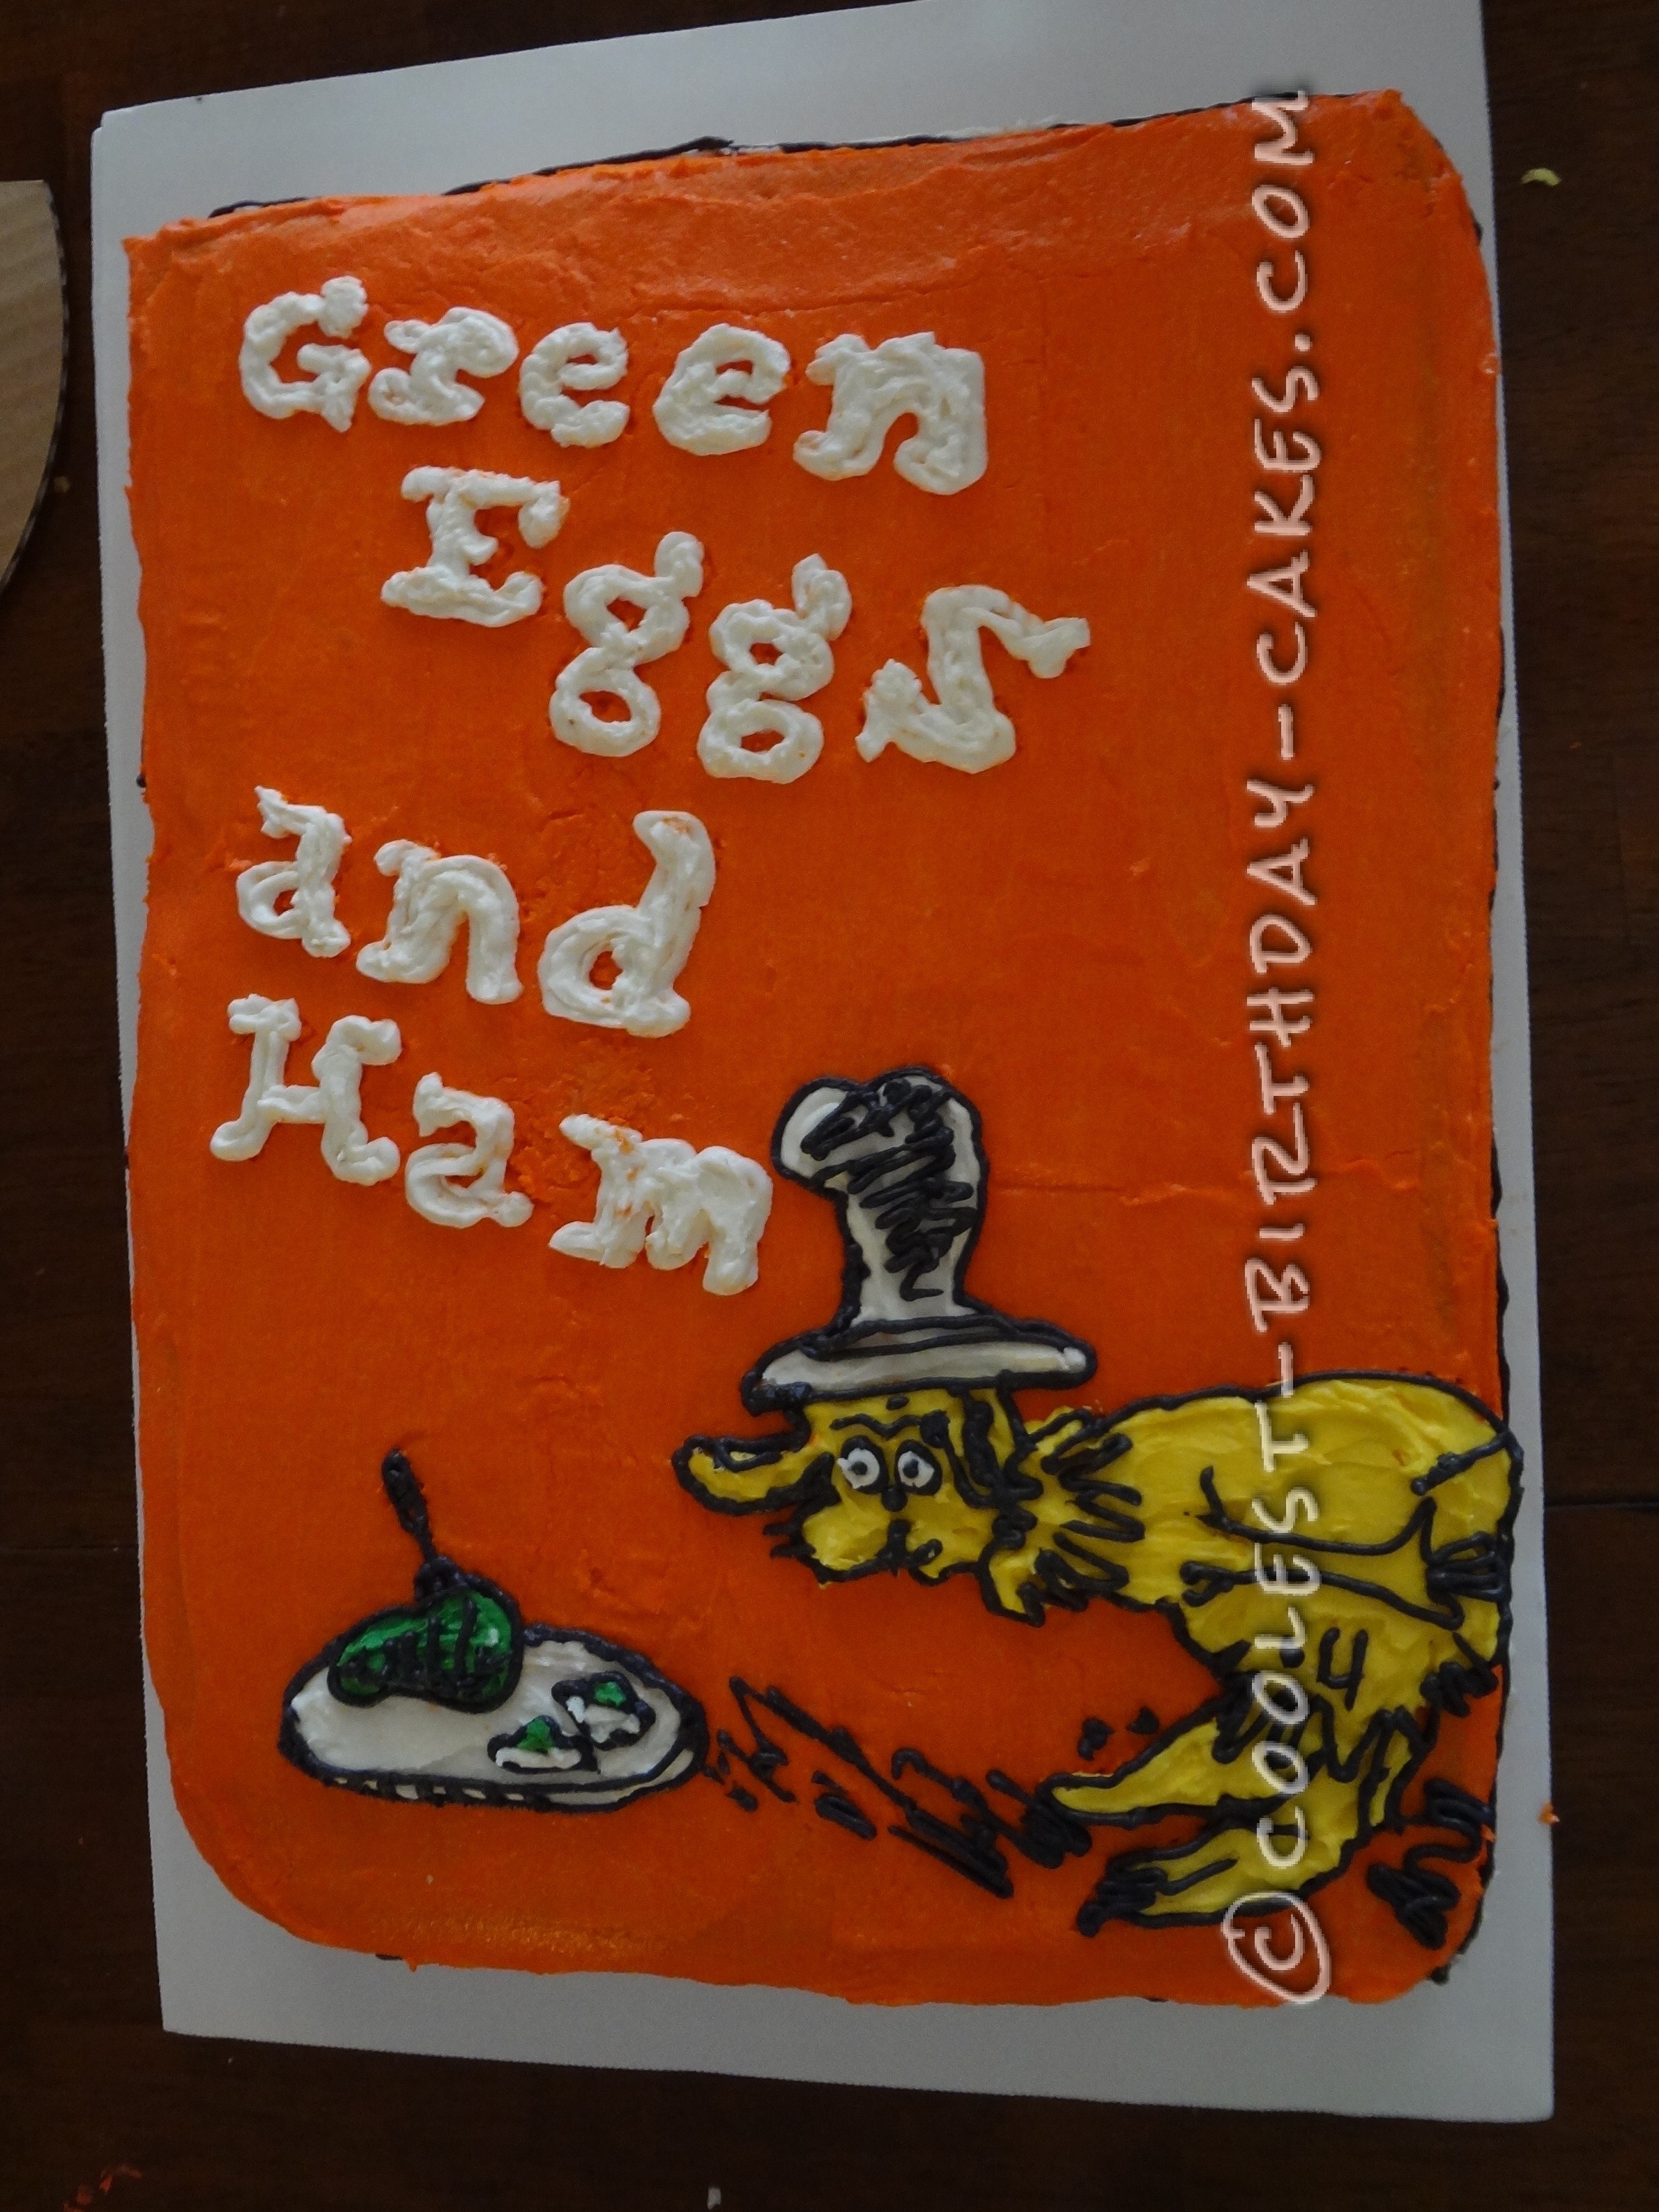 Coolest Green Eggs and Ham Birthday Cake